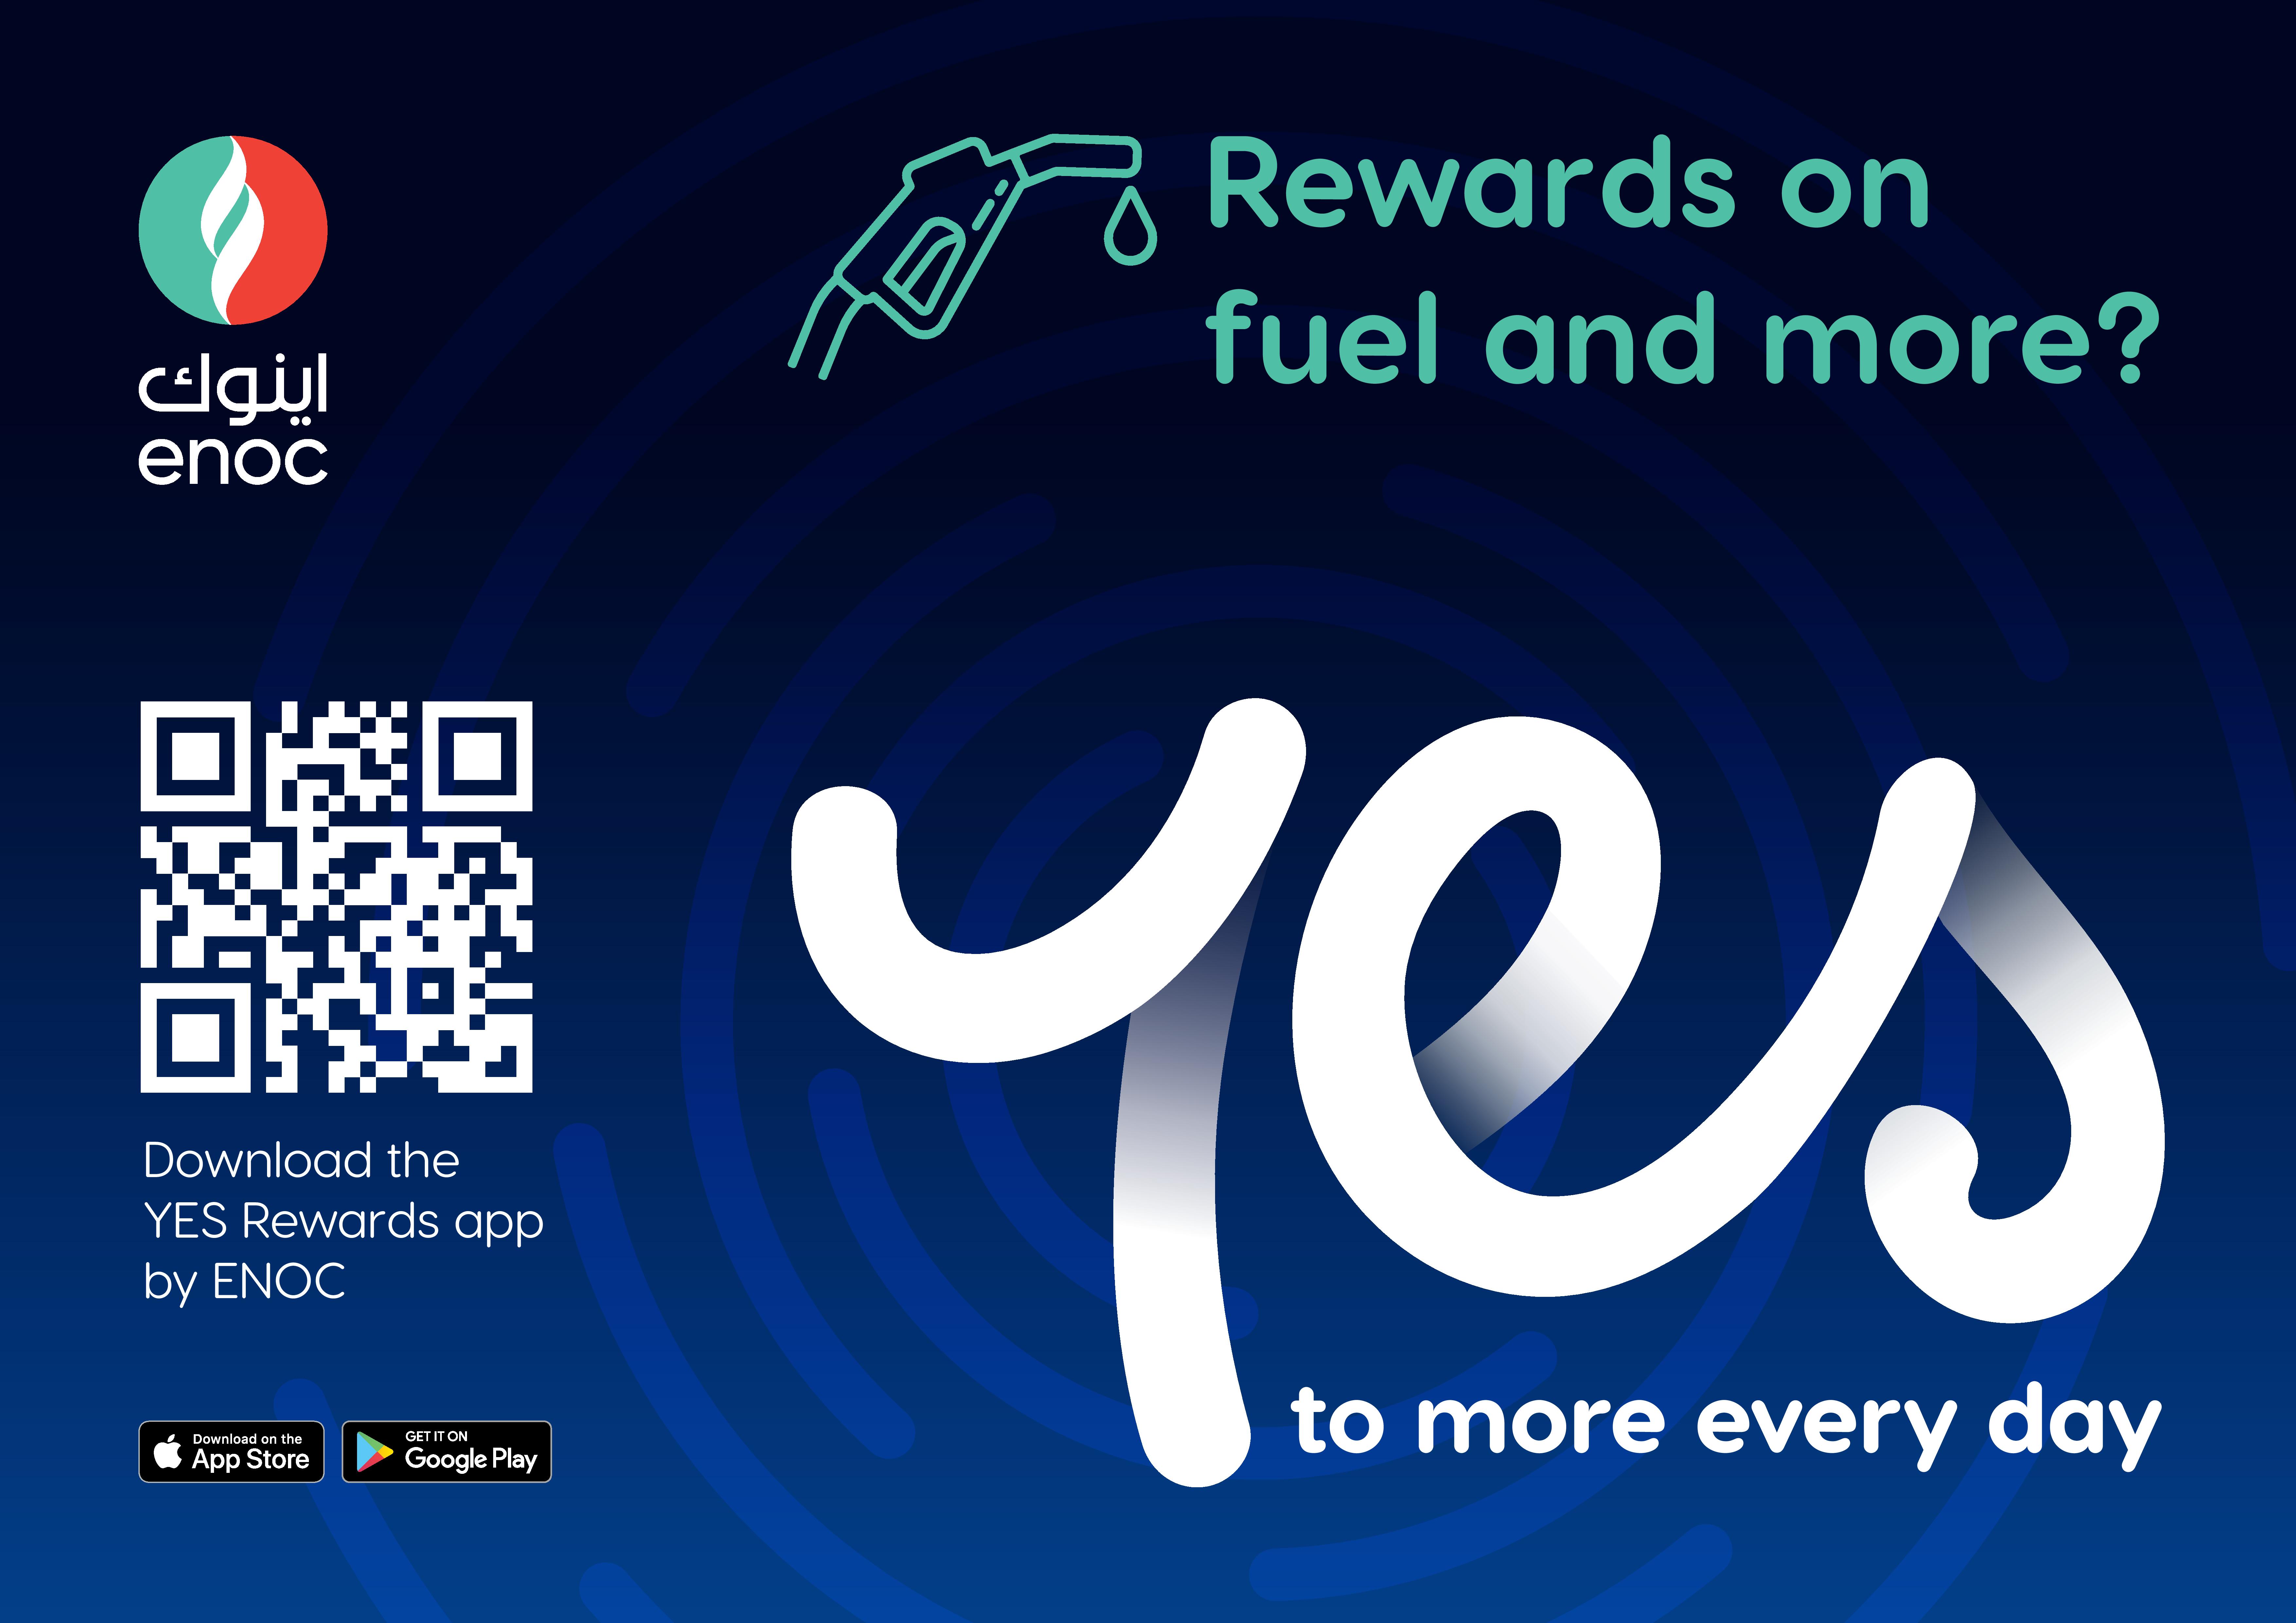 ENOC Group launches ‘Yes’ rewards programme